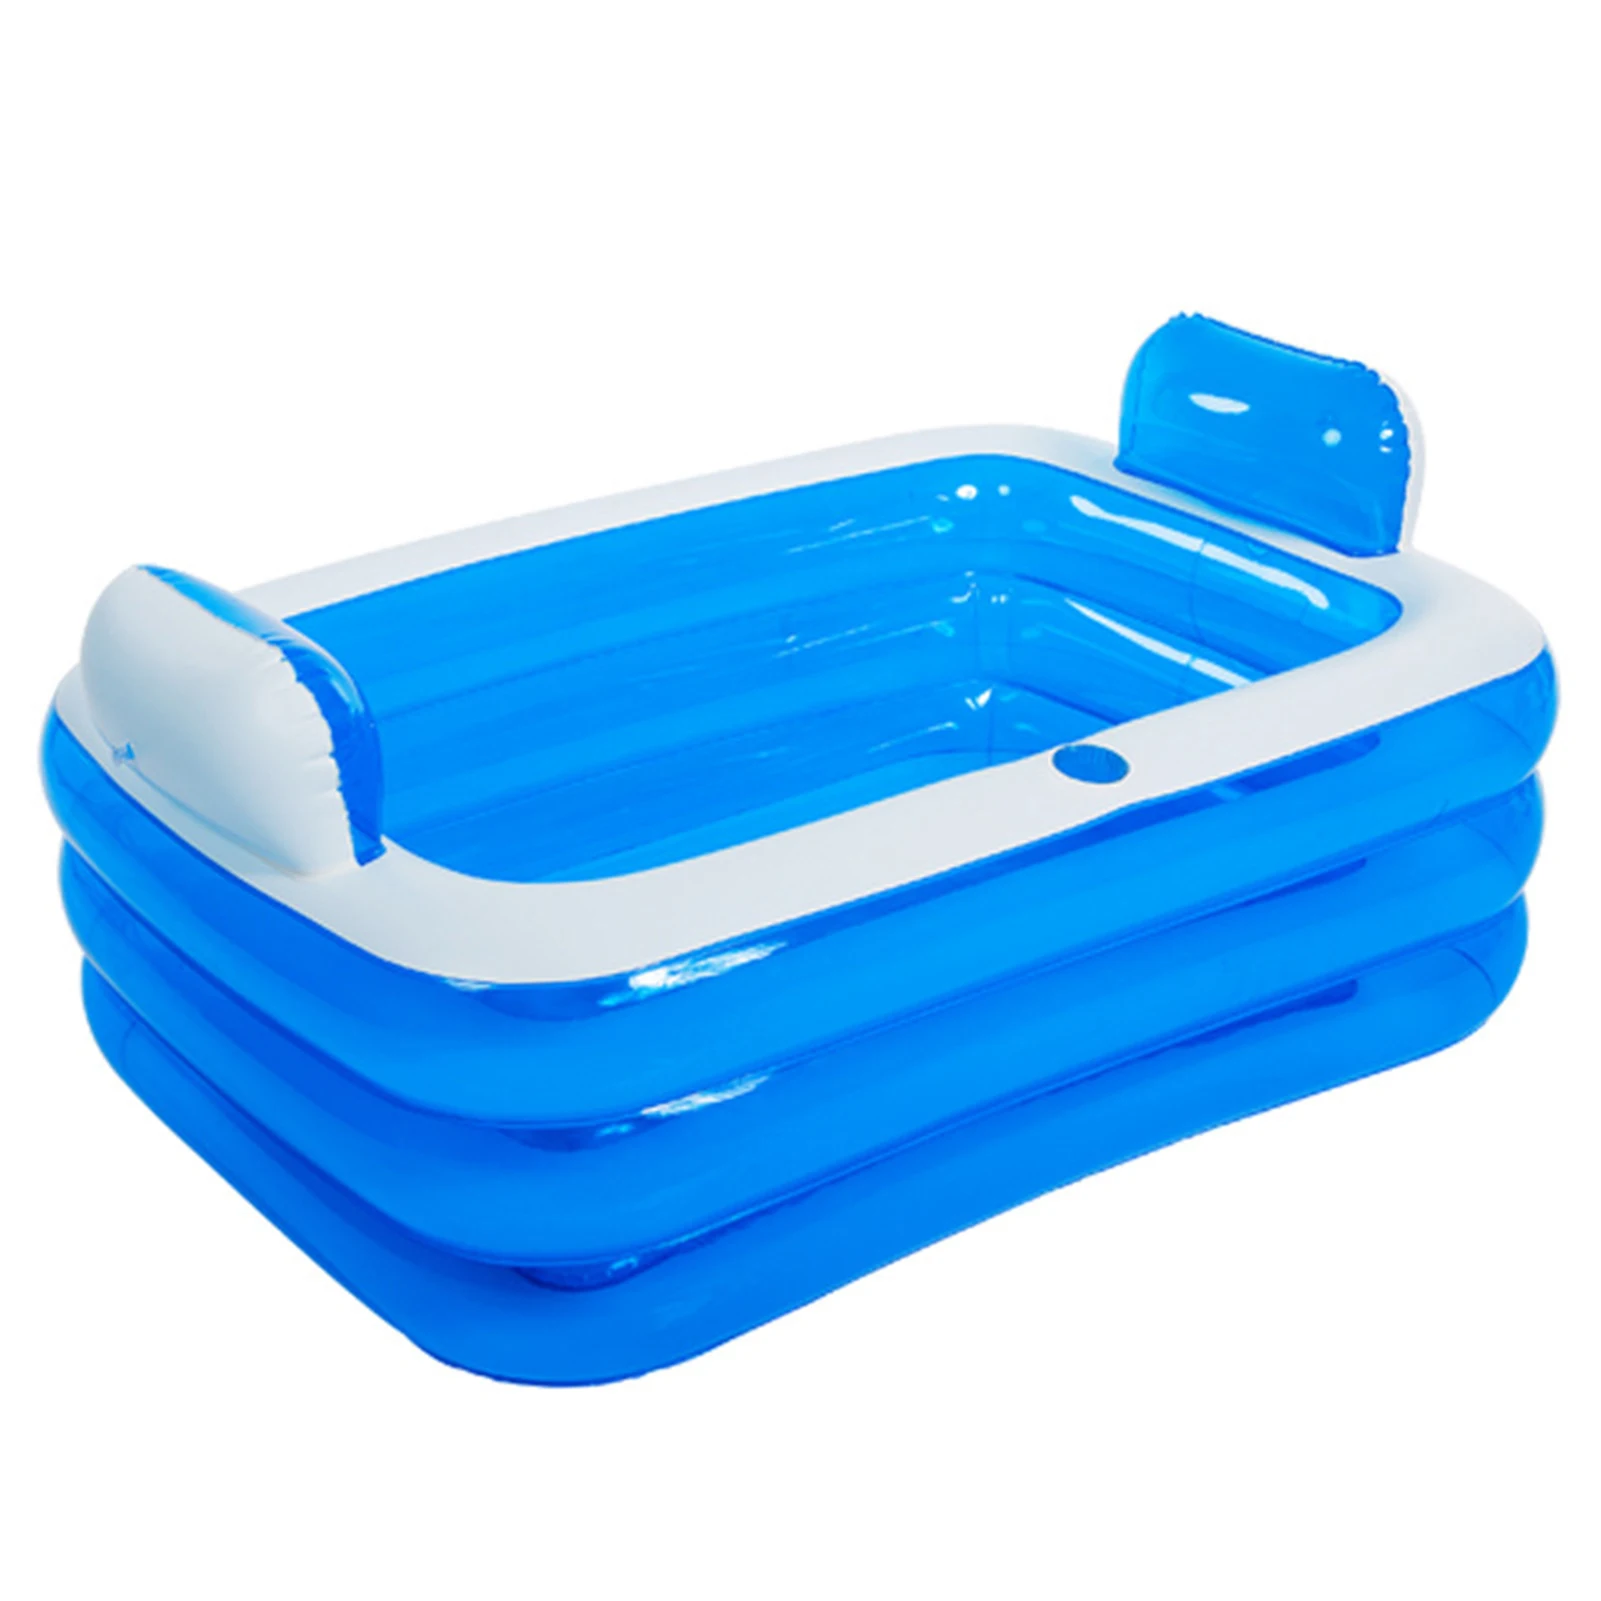 Hot Tub Couple Bath Barrel Thick 3 Layer Double Bathtub Inflatable Foldable Tub Thickened Large Size Tub for Adult Home VALINK Inflatable Adult Bath Tub